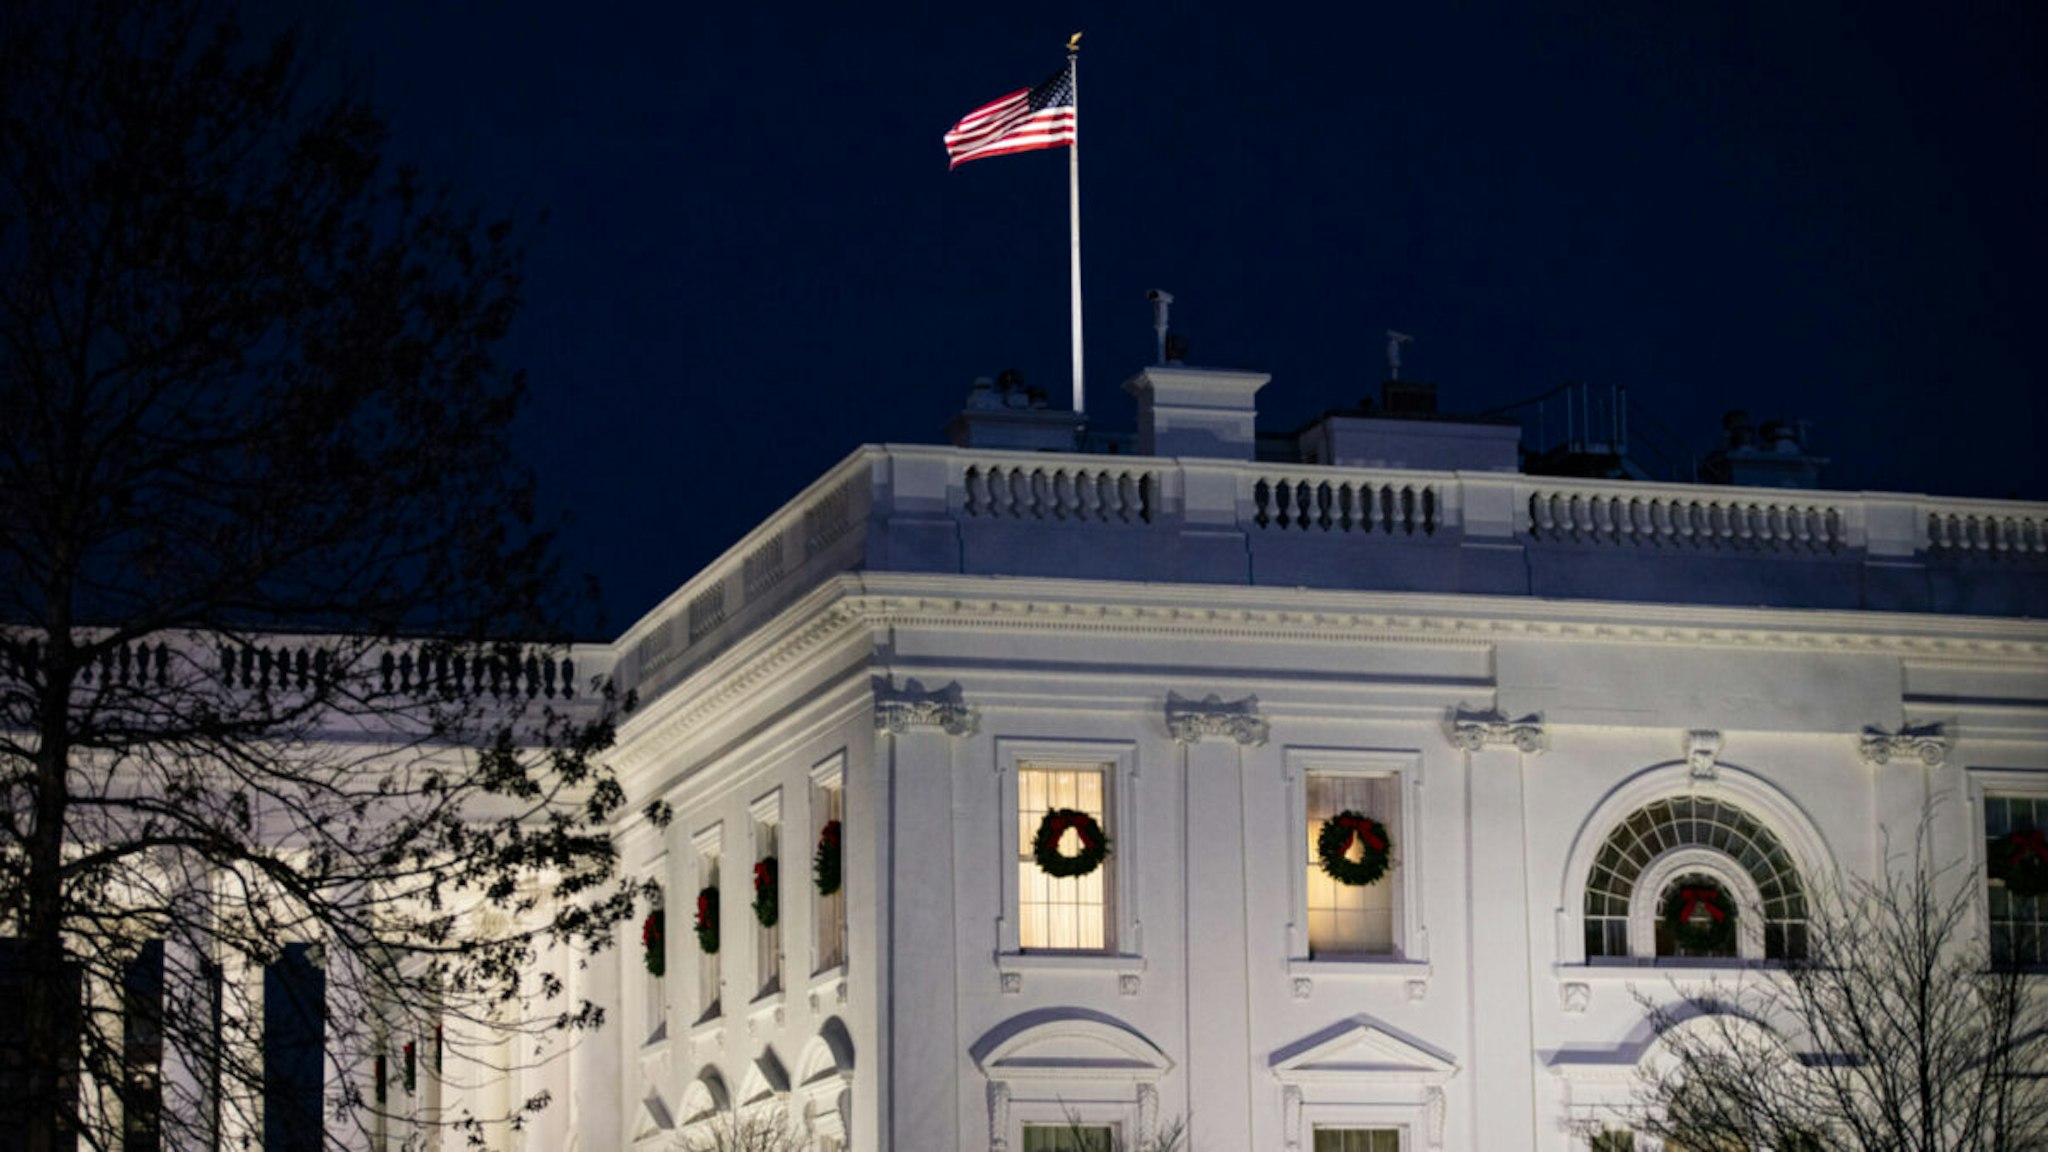 The White House at night in Washington, D.C., U.S., on Friday, Dec. 11, 2020.